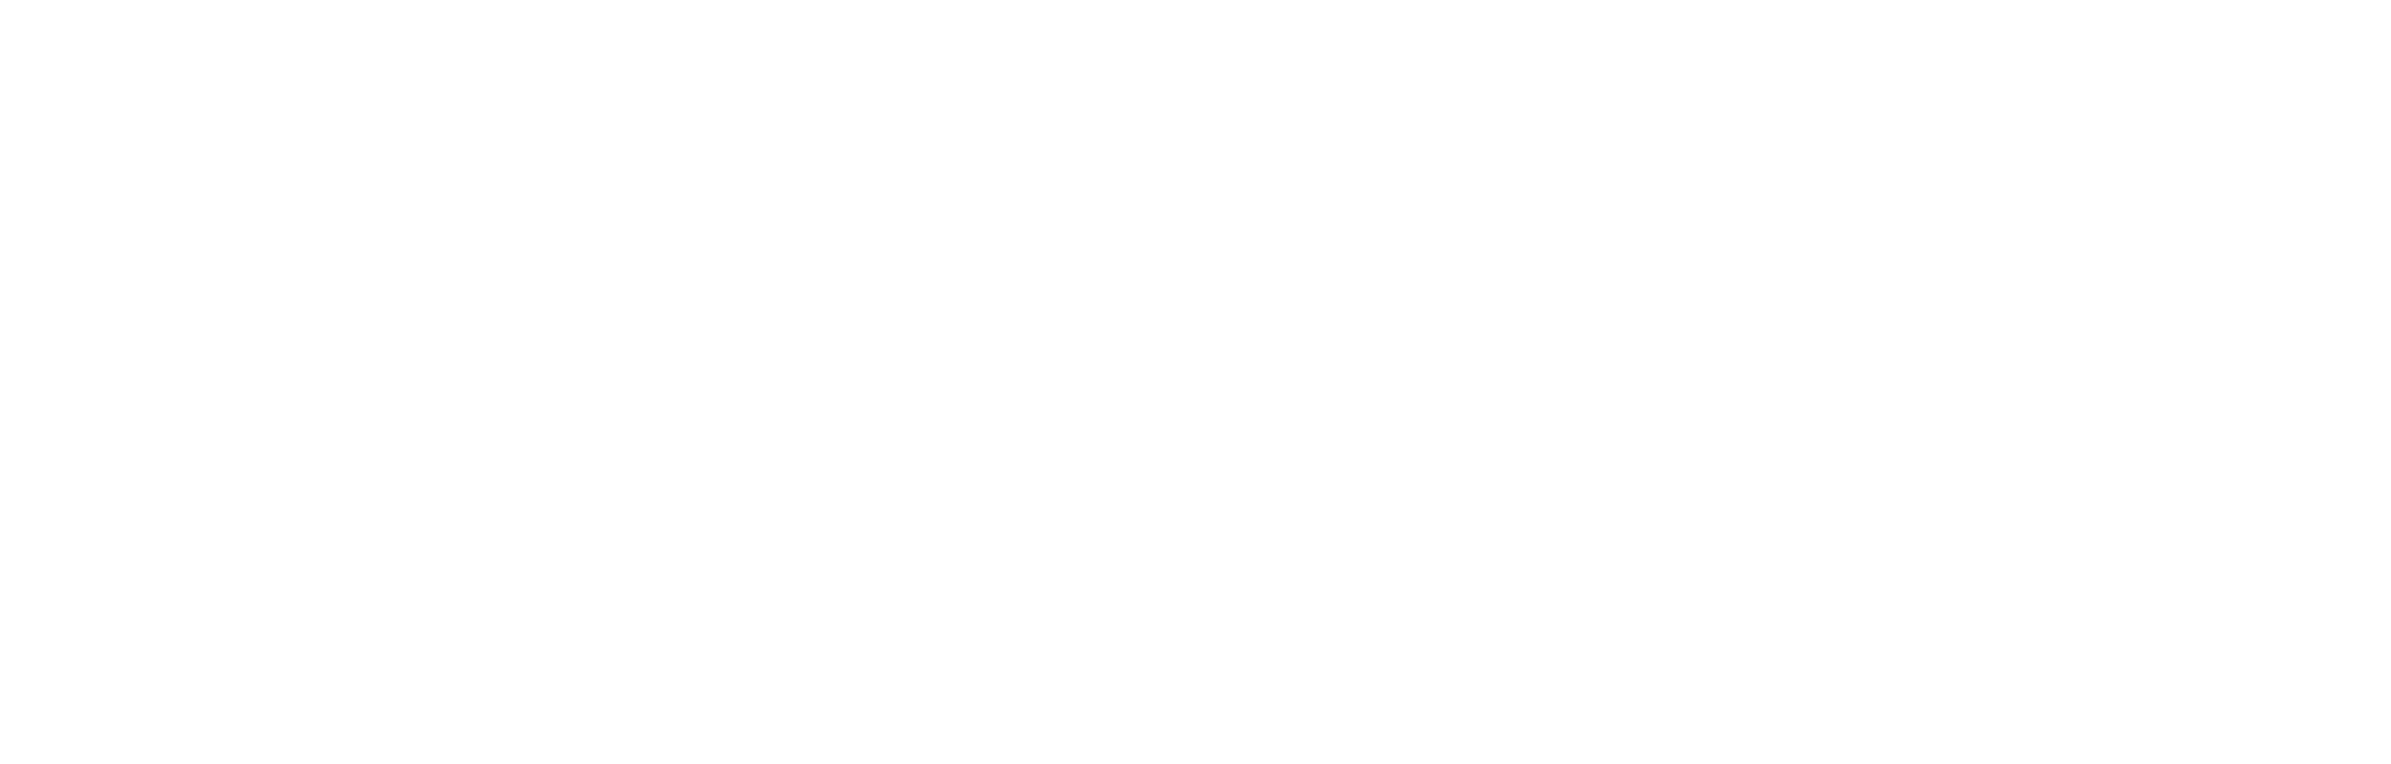 Just fly it?